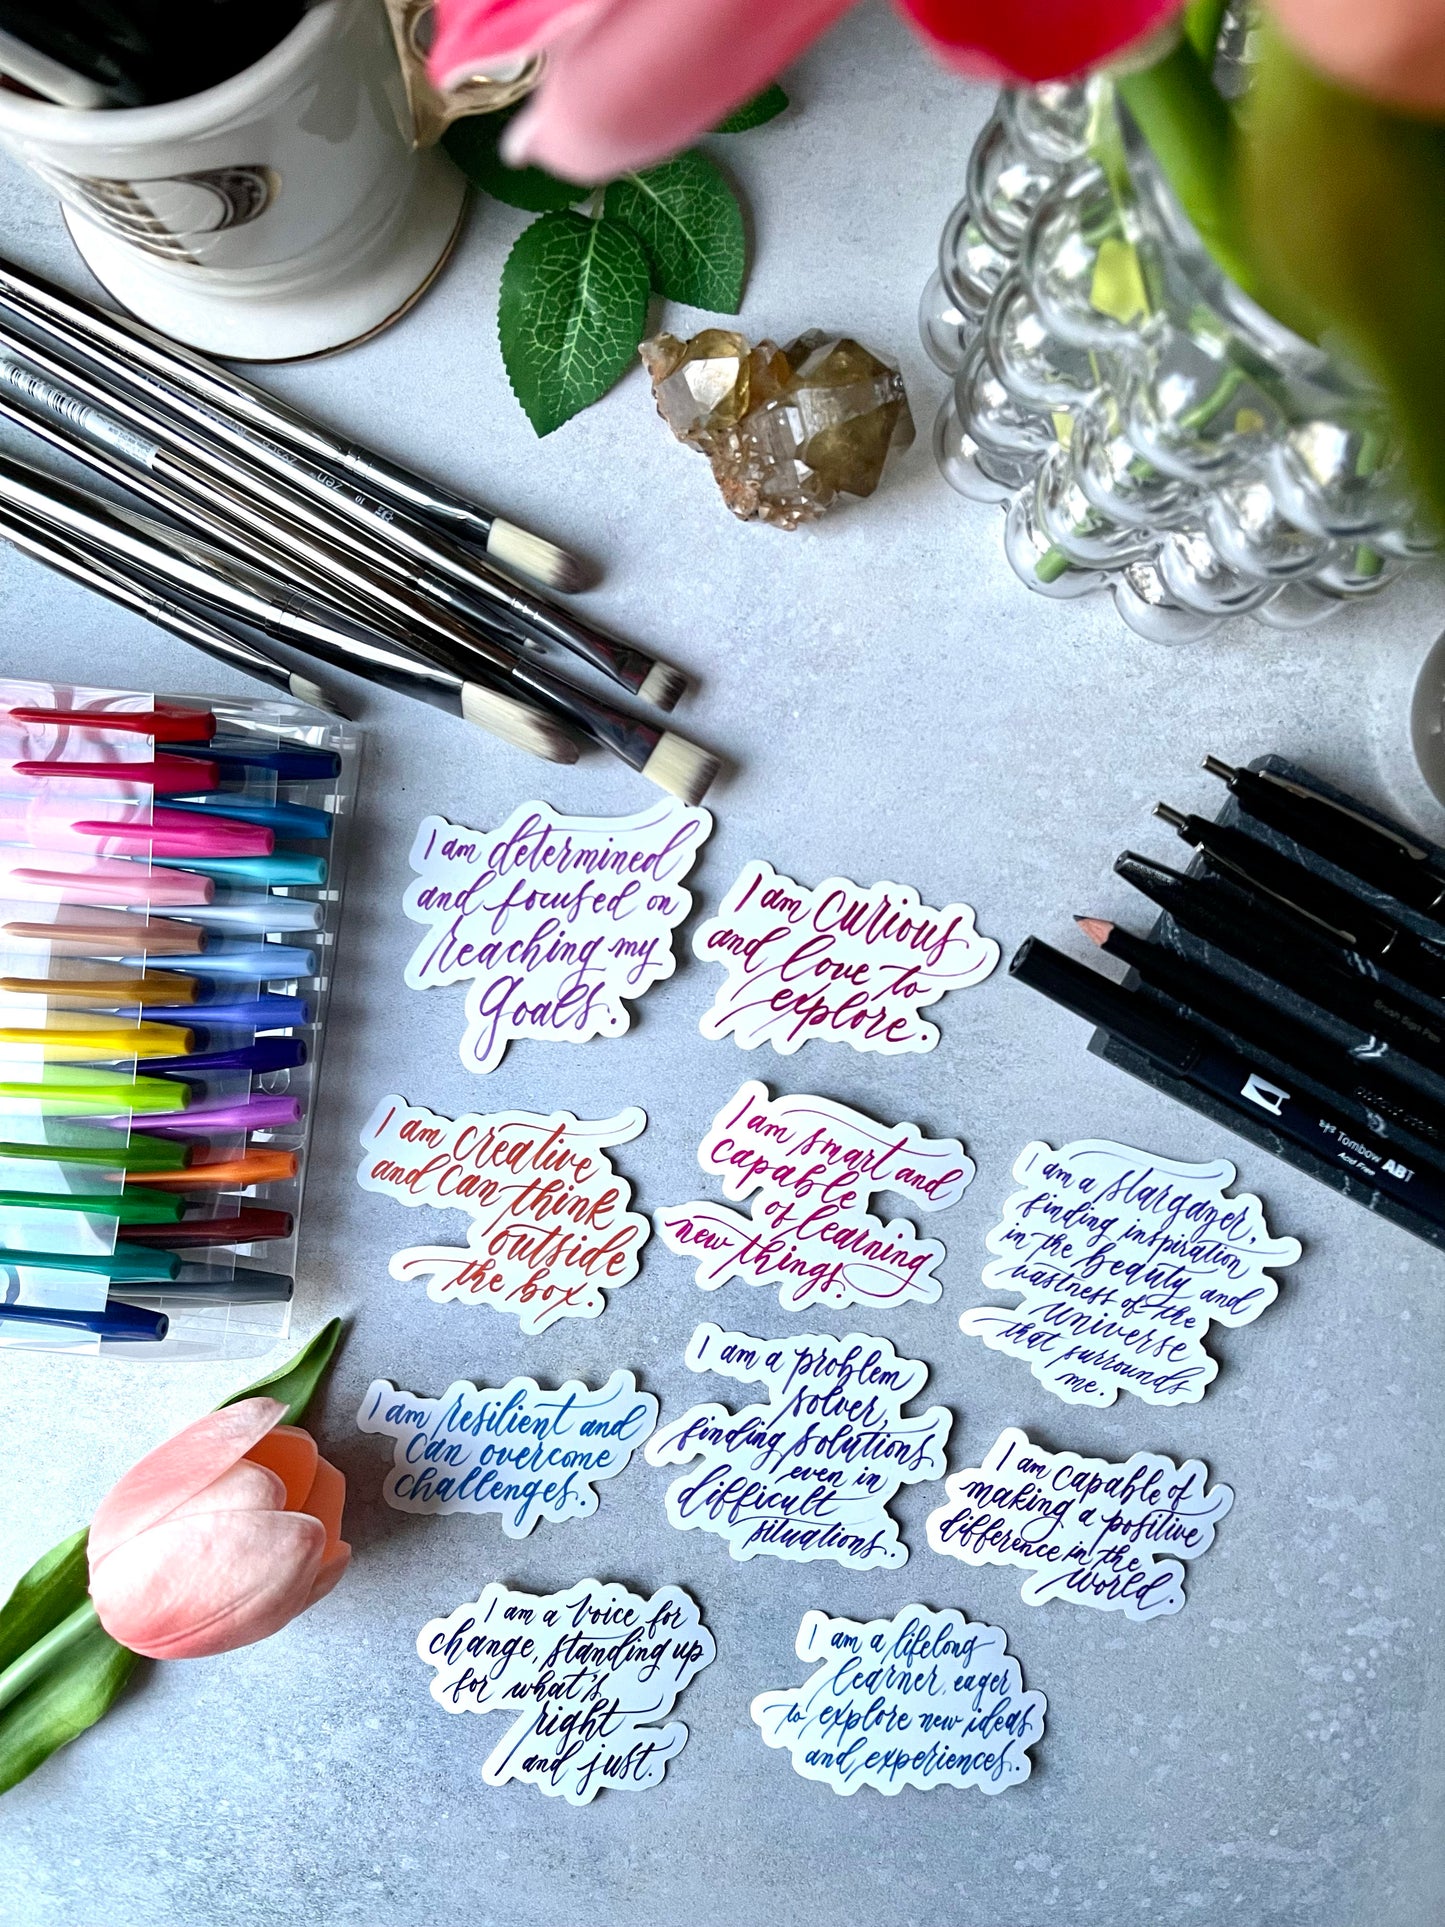 Set of vinyl decal stickers with motivational quotes and inspirational affirmations on a flat lay desk top with colorful markers, a tulip, and crystals.